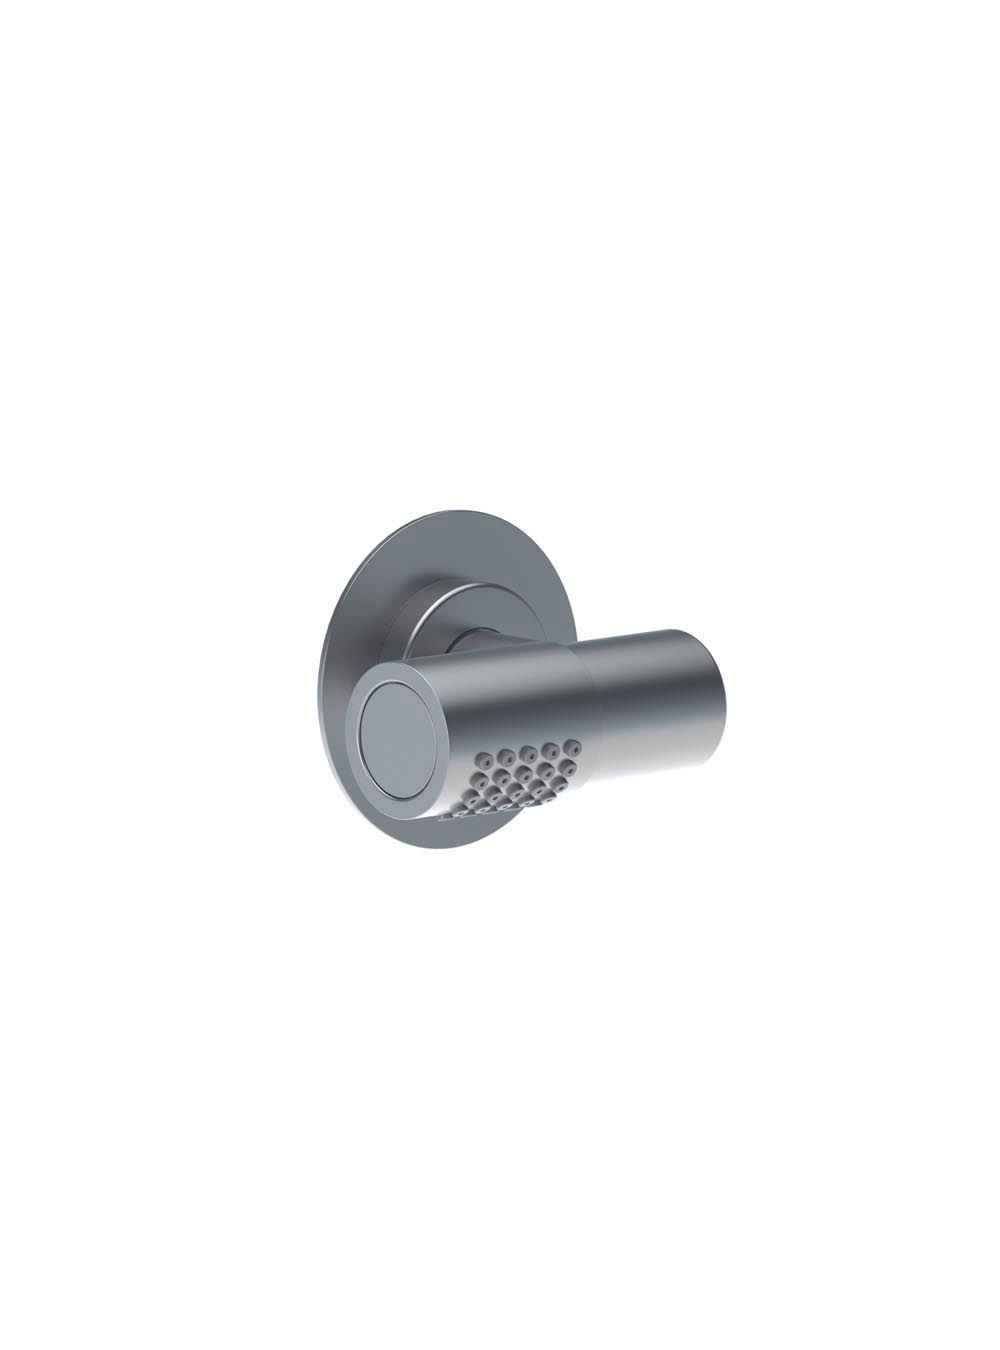 080K: 60 mm head shower, body jet. 60 mm cover flange included.